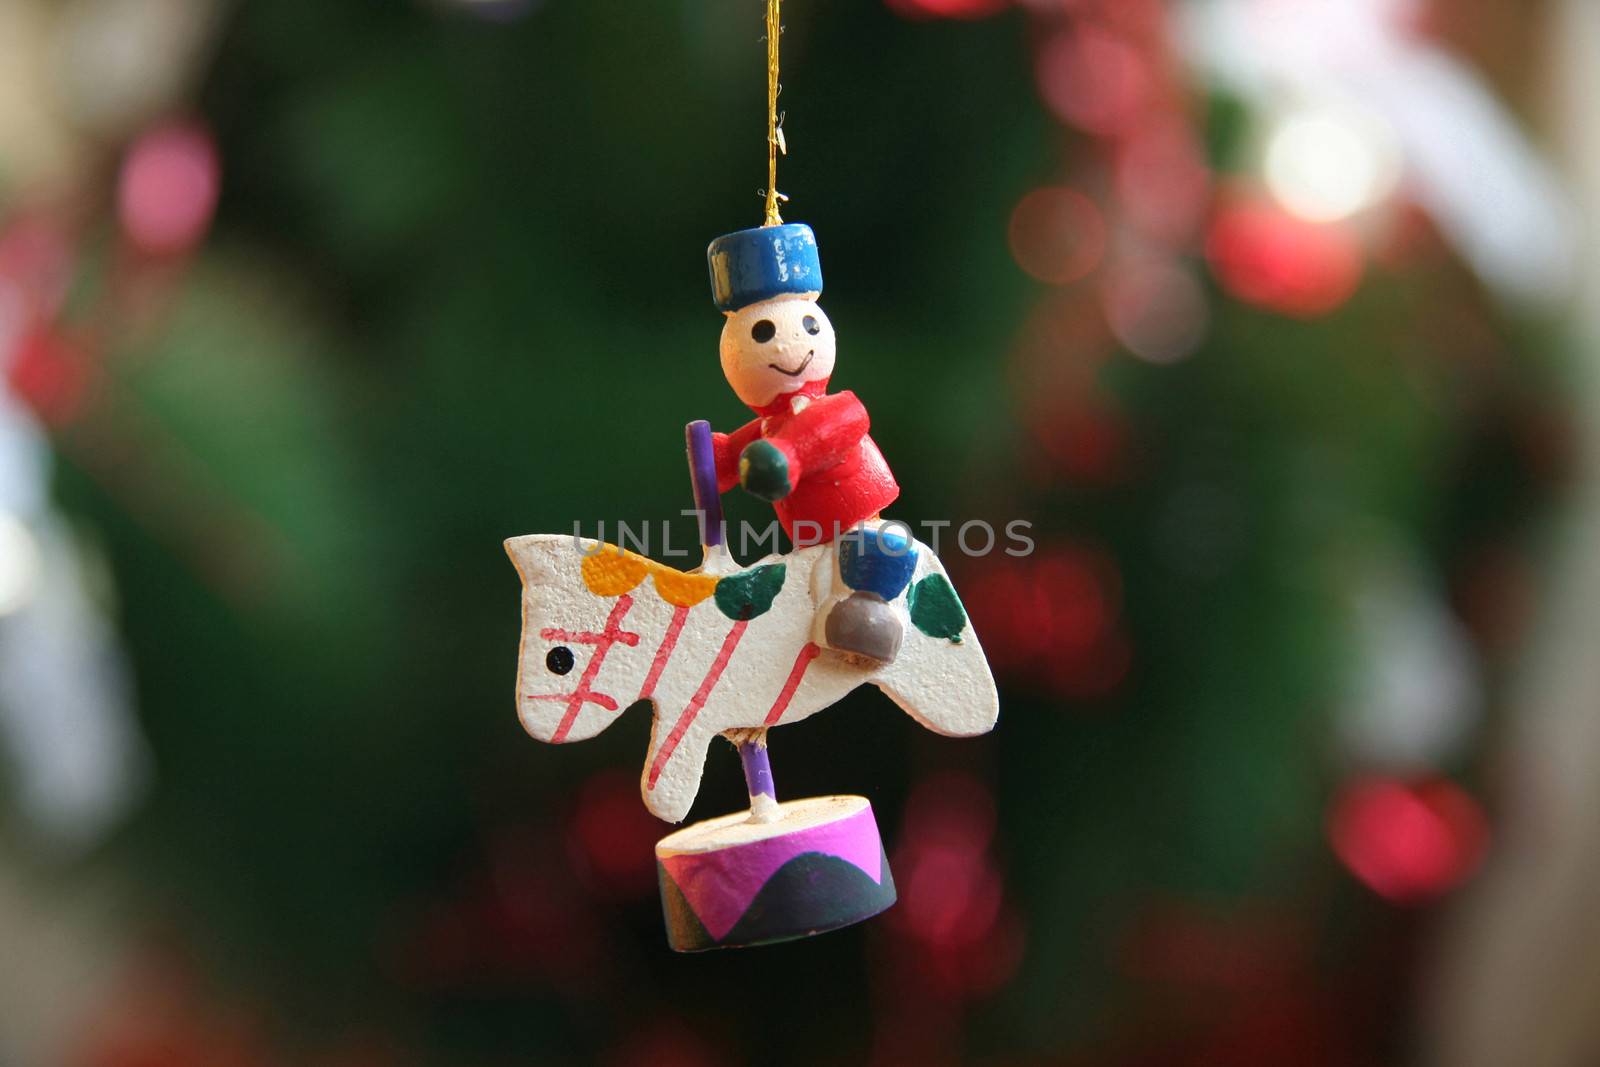 Wooden Christmas Carousel Ornament by CelsoDiniz